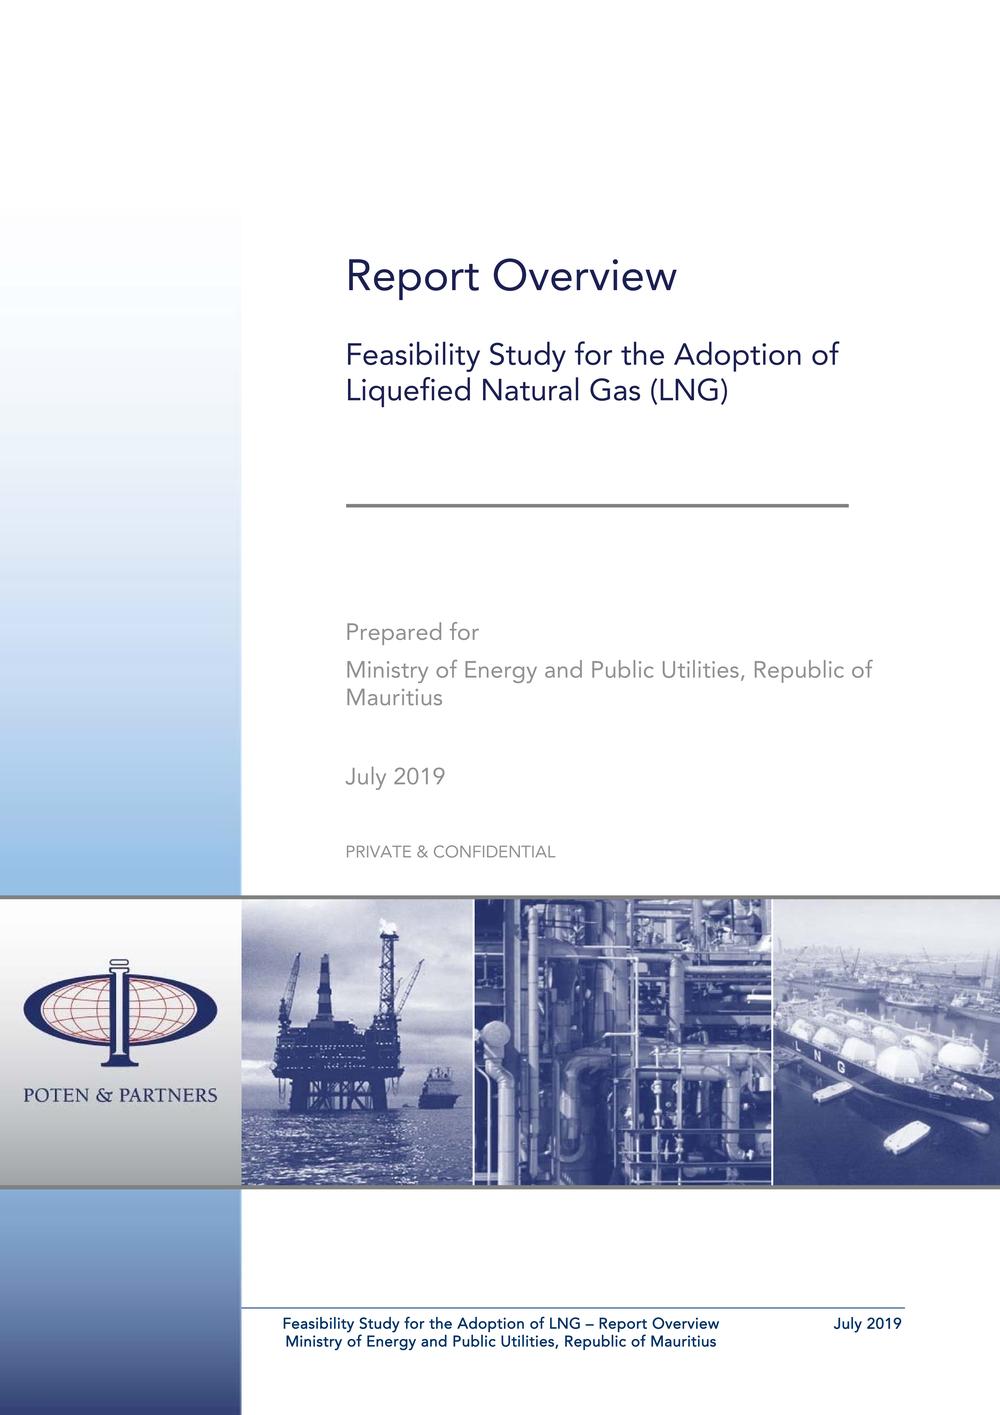 Report  Overview  Feasibility Study for the Adoption of Liquefied Natural Gas (LNG).